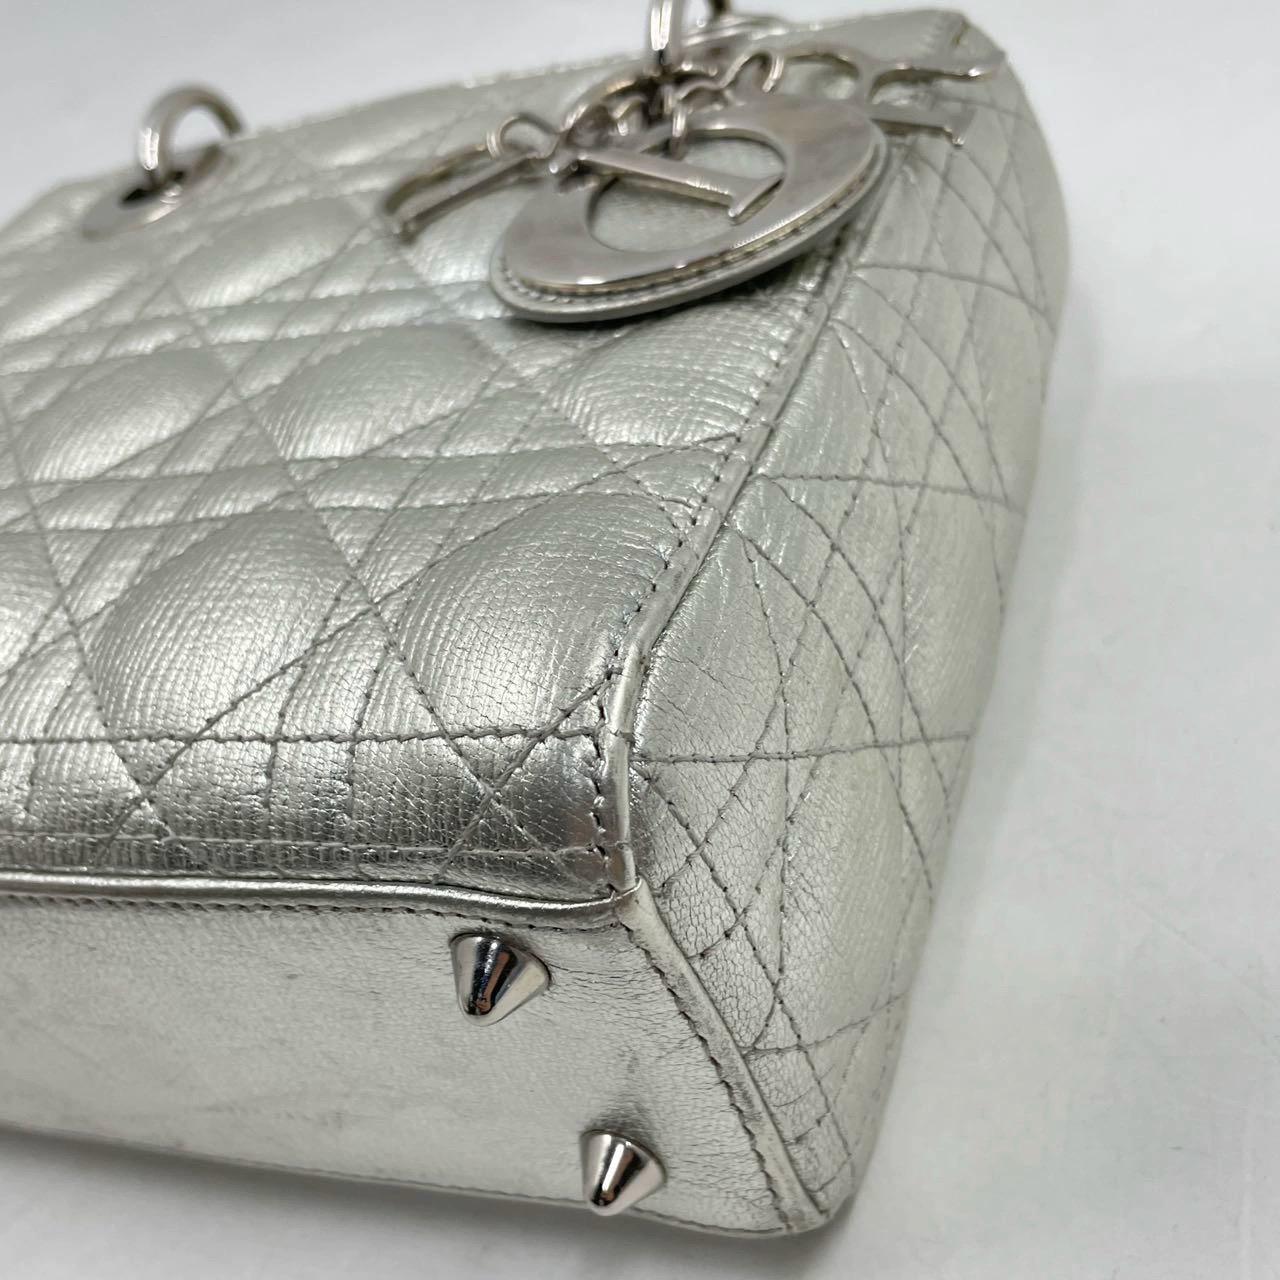 Lady Dior ABCdior Small Silver Cannage Lambskin Handbag with Strap For Sale 11